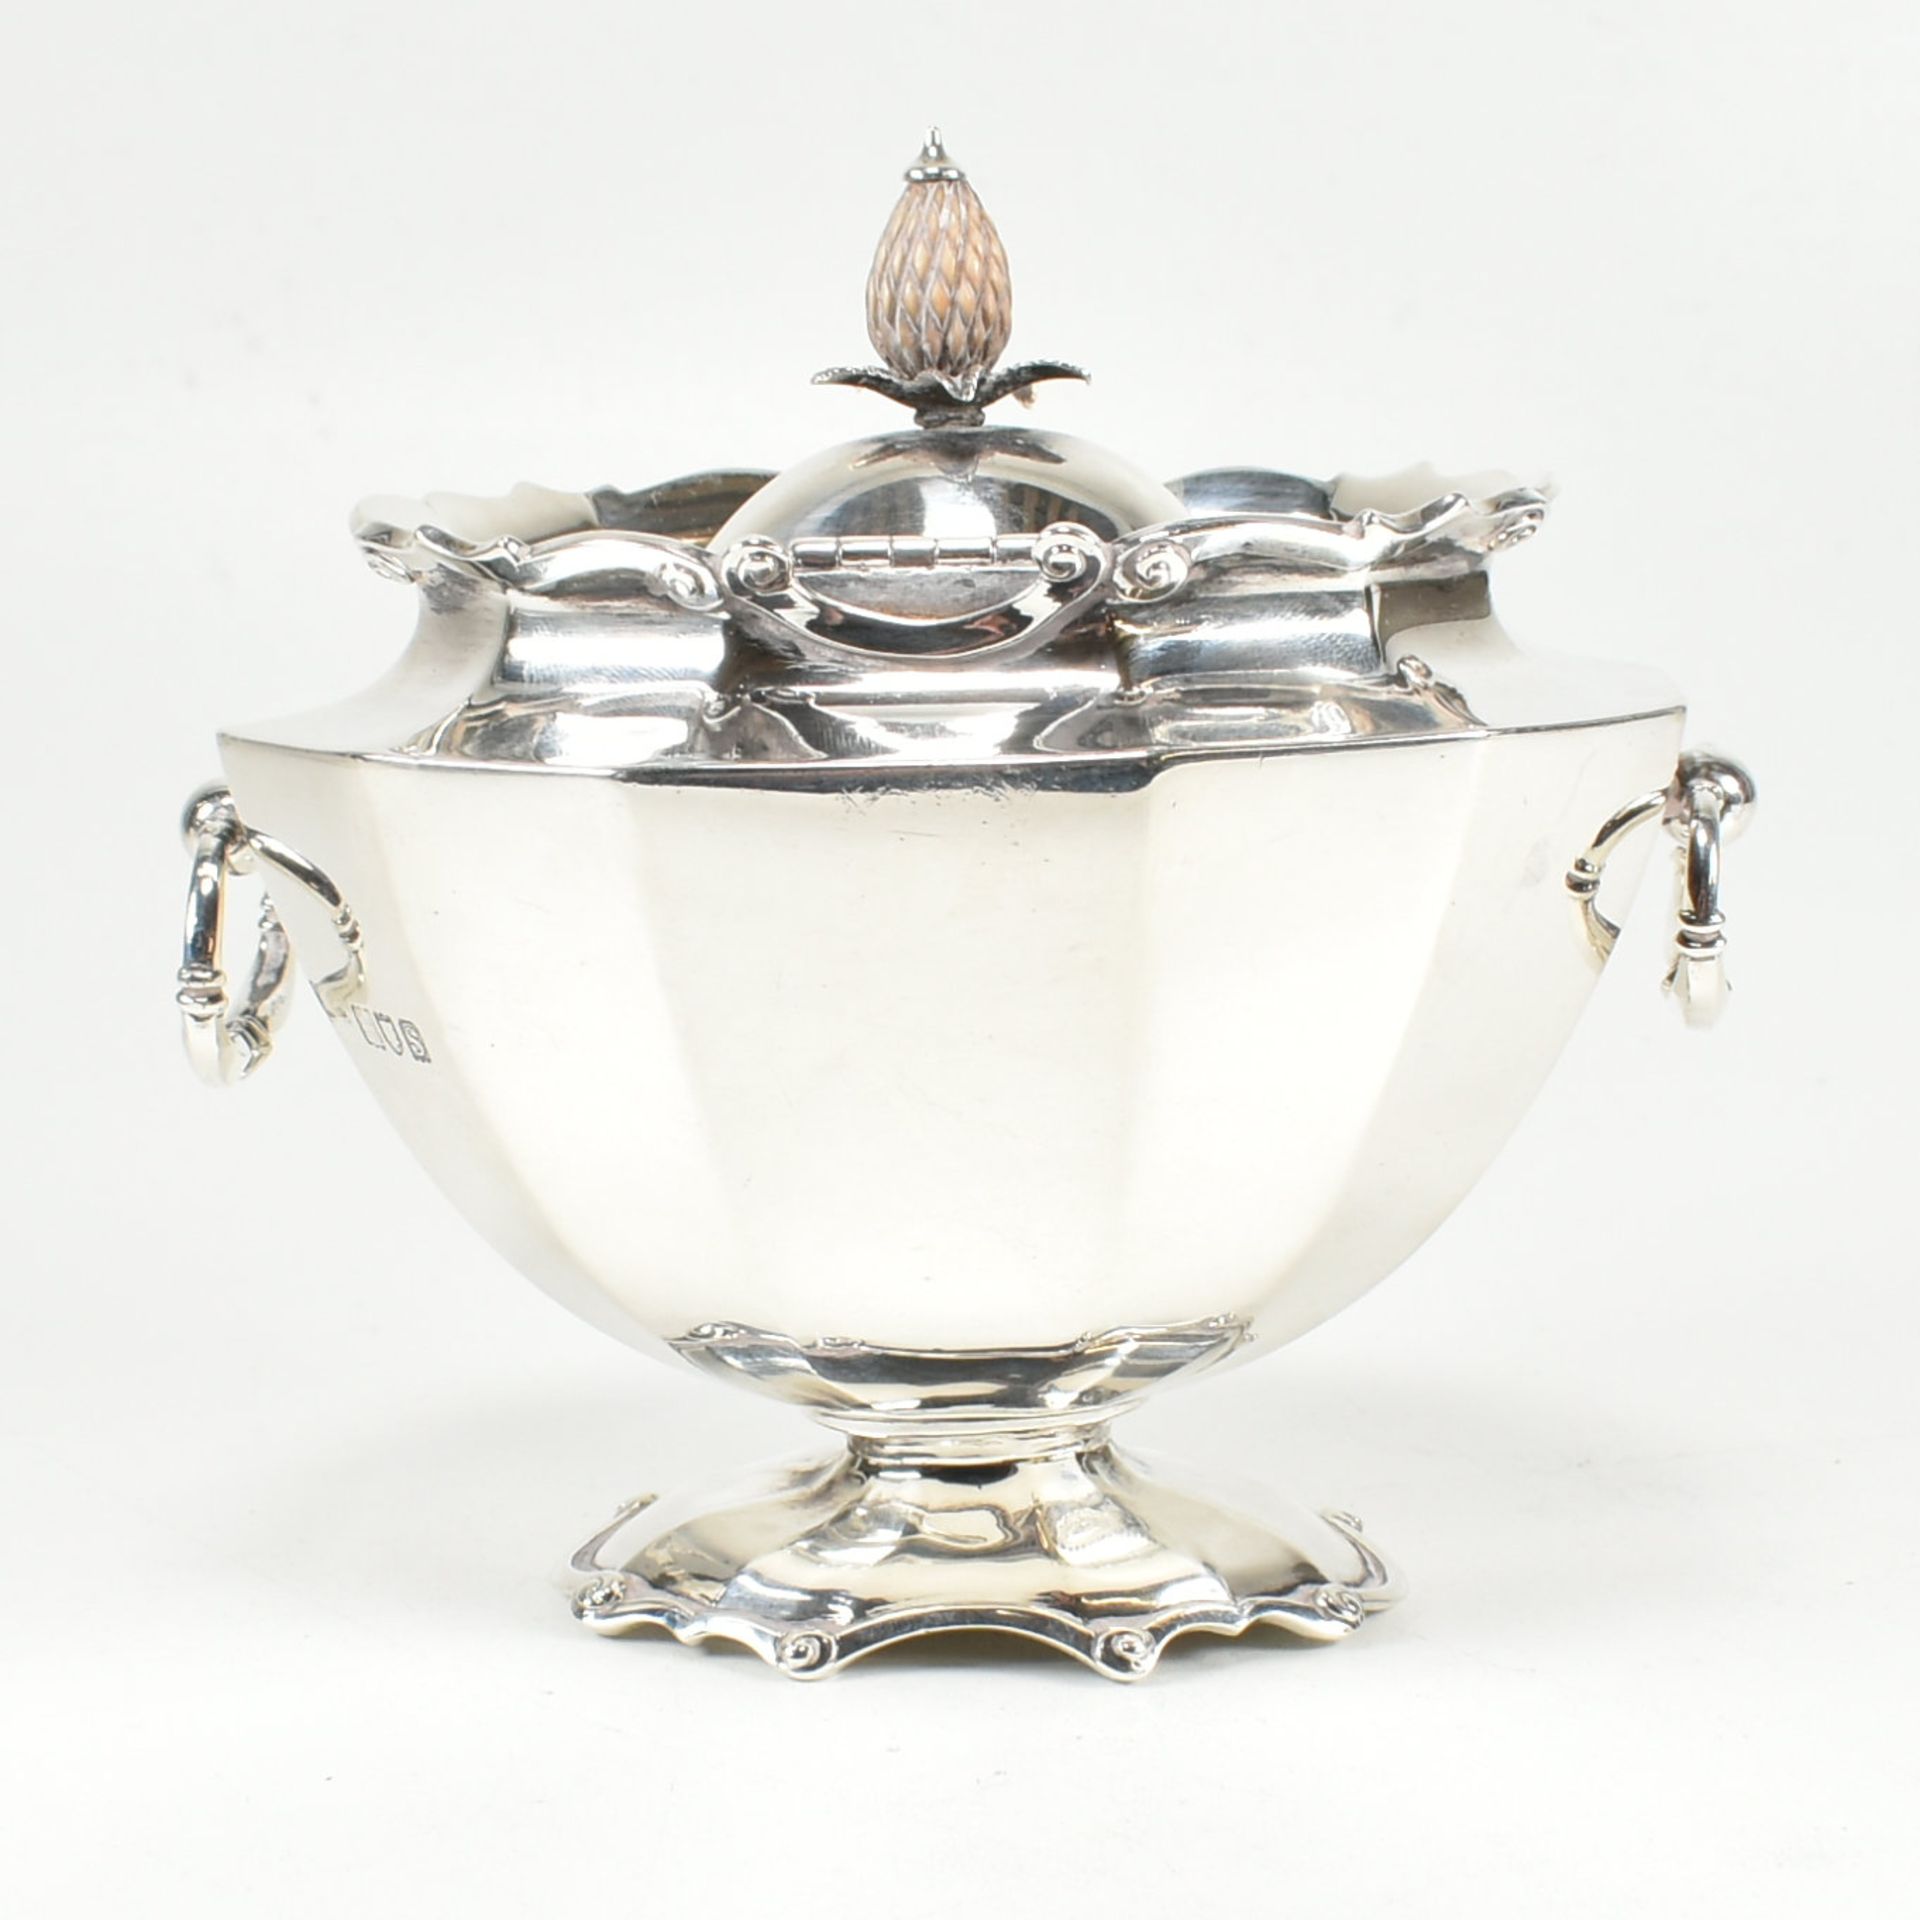 EARLY 20TH CENTURY HALLMARKED SILVER TEA CADDY - Image 5 of 8